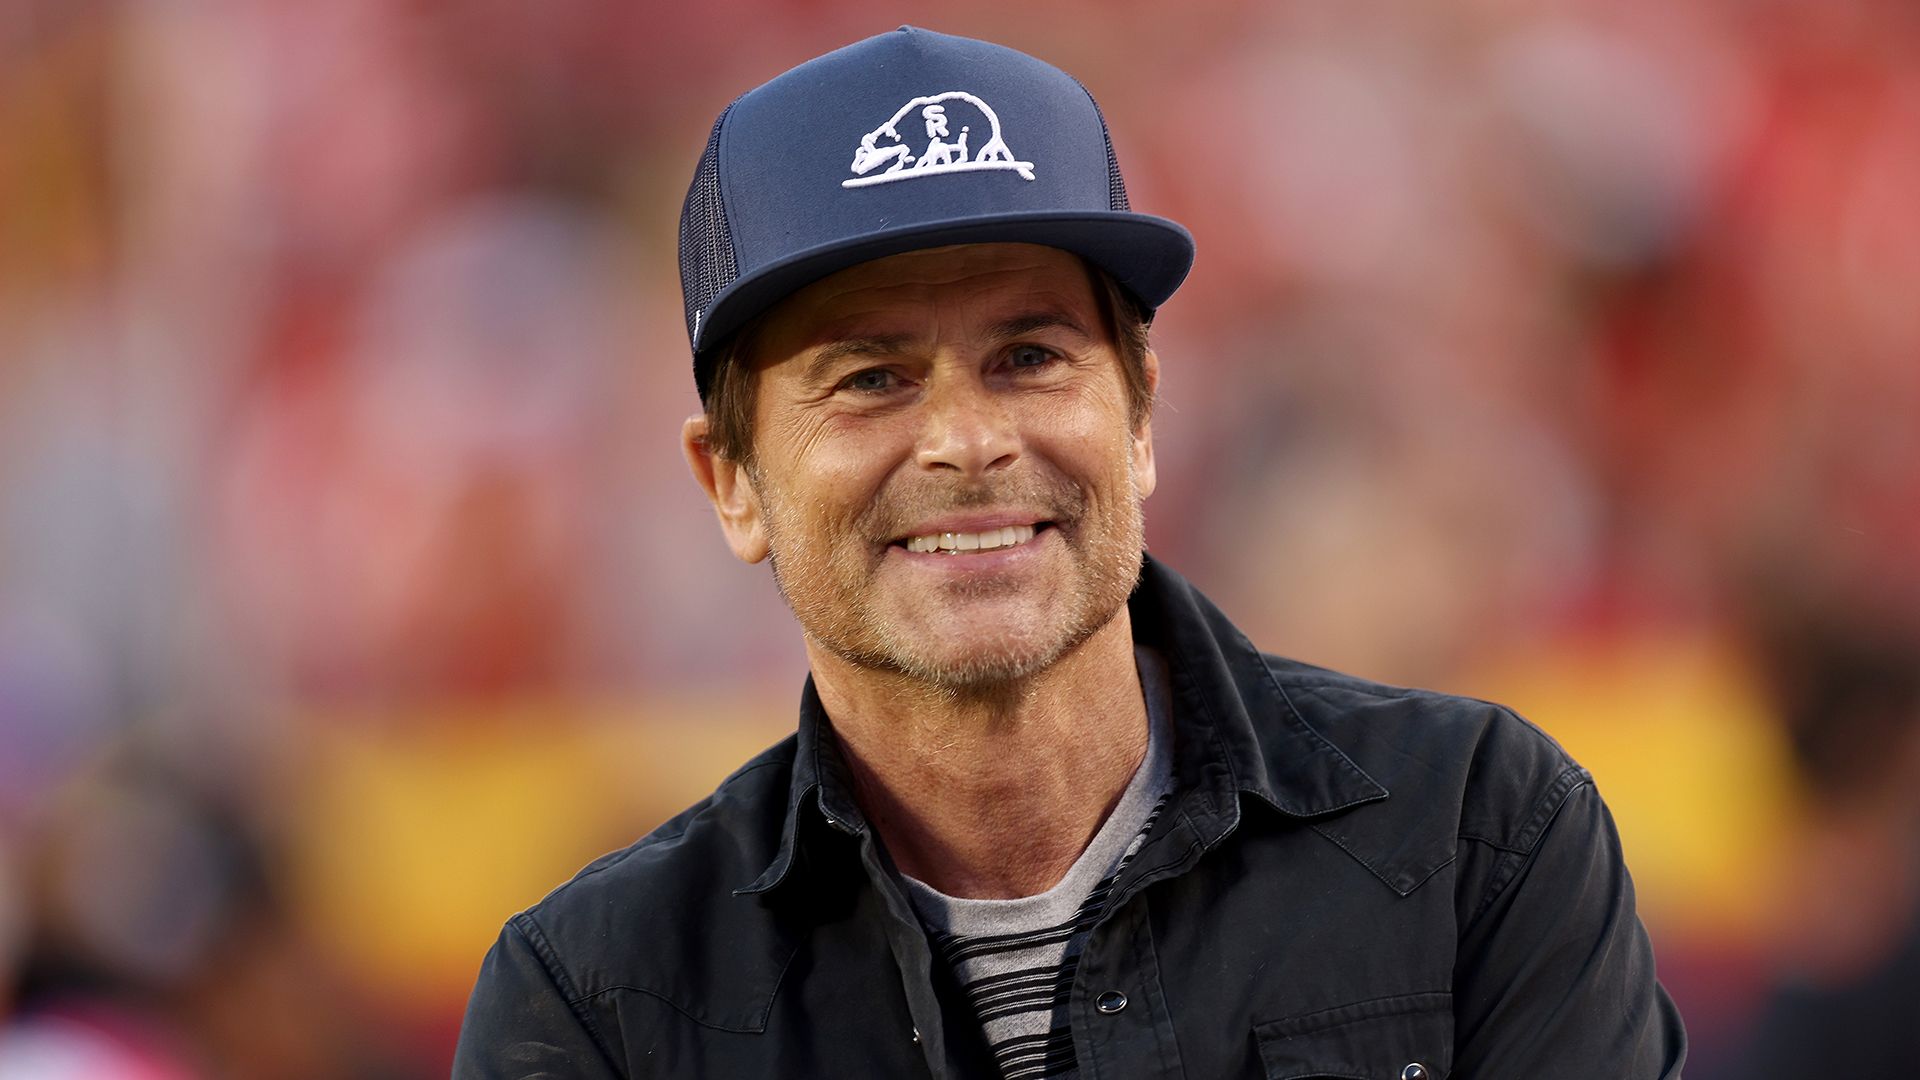 Rob Lowe during pregame between the Kansas City Chiefs and the Denver Broncos in October 2023